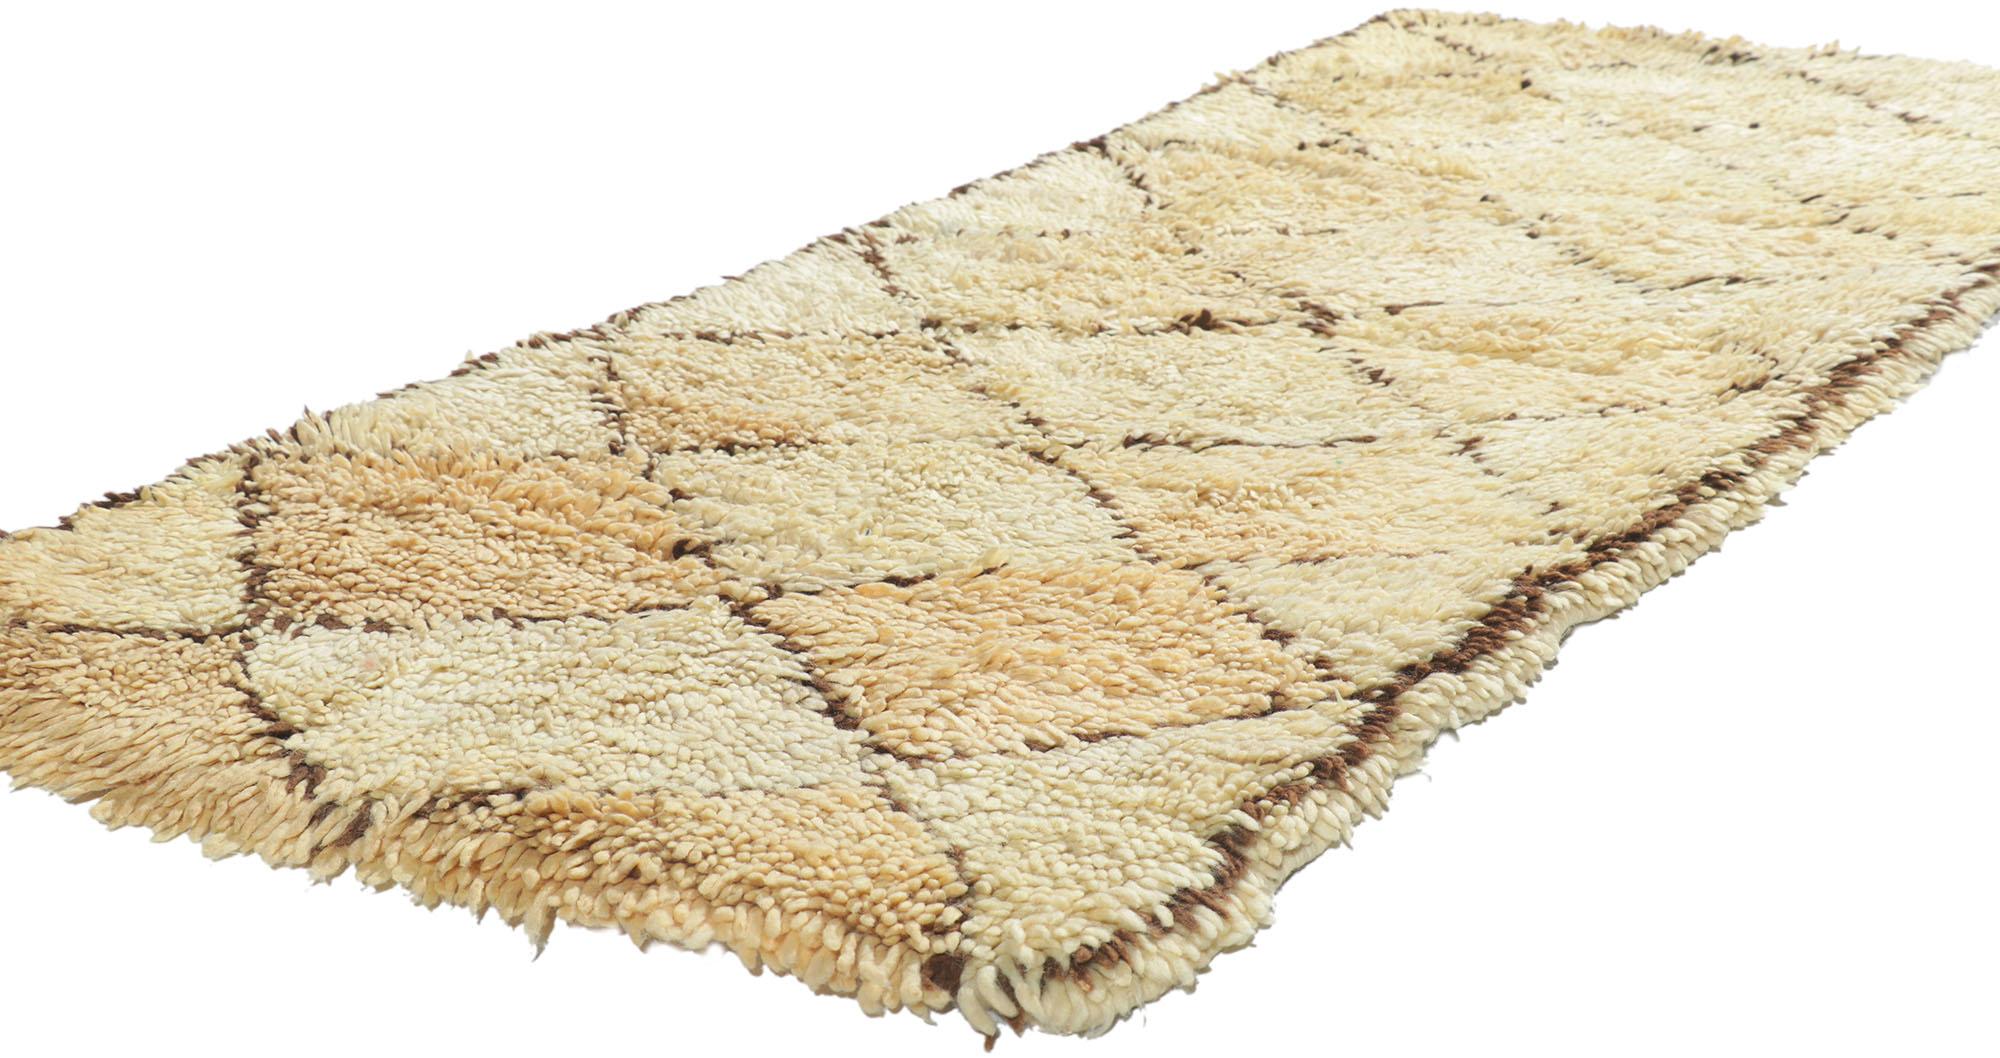 21636 Vintage Berber Moroccan Azilal rug with Mid-Century Modern style 02'06 x 06'01. With its simplicity, Mid-Century Modern style, incredible detail and texture, this hand knotted wool vintage Berber Moroccan Azilal rug is a captivating vision of